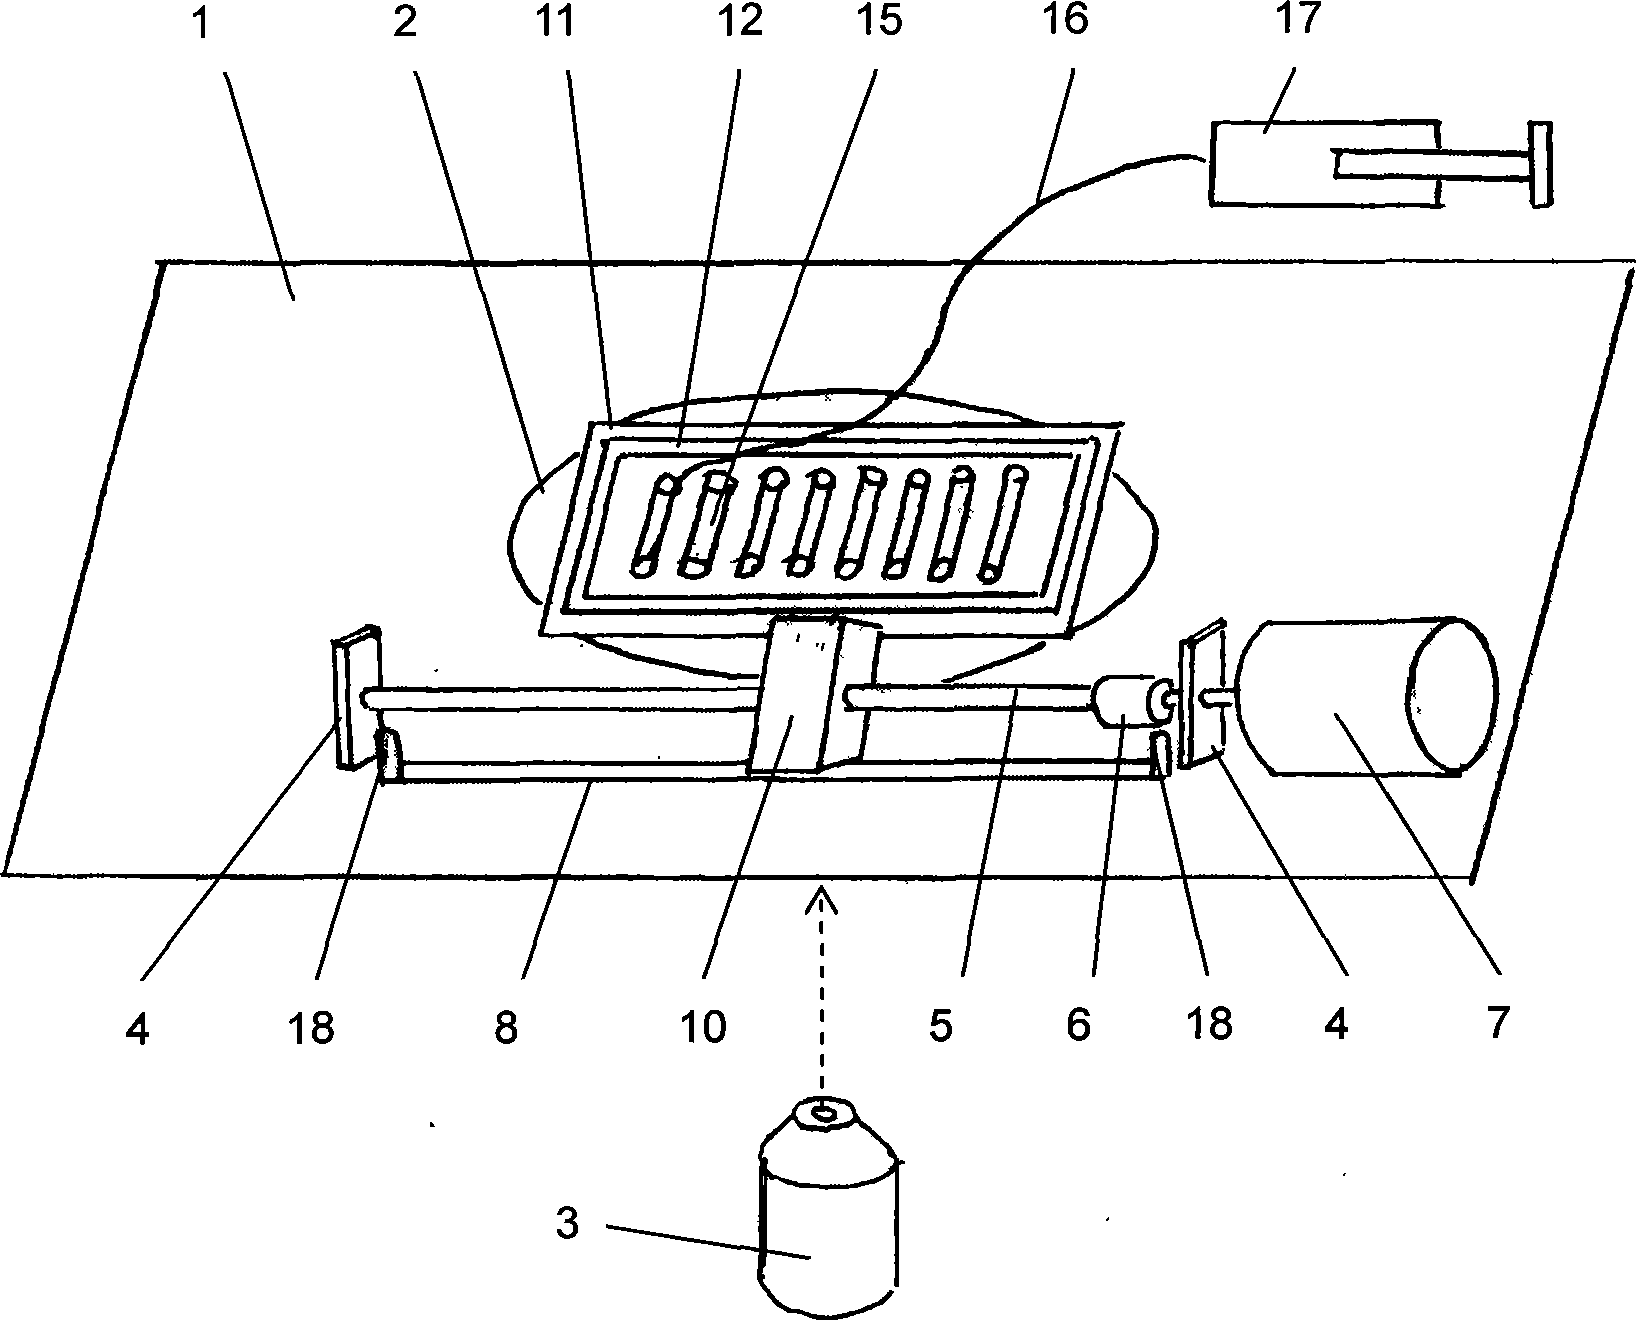 Multi-sample stage allowing for automatic movement of inverted microscopes